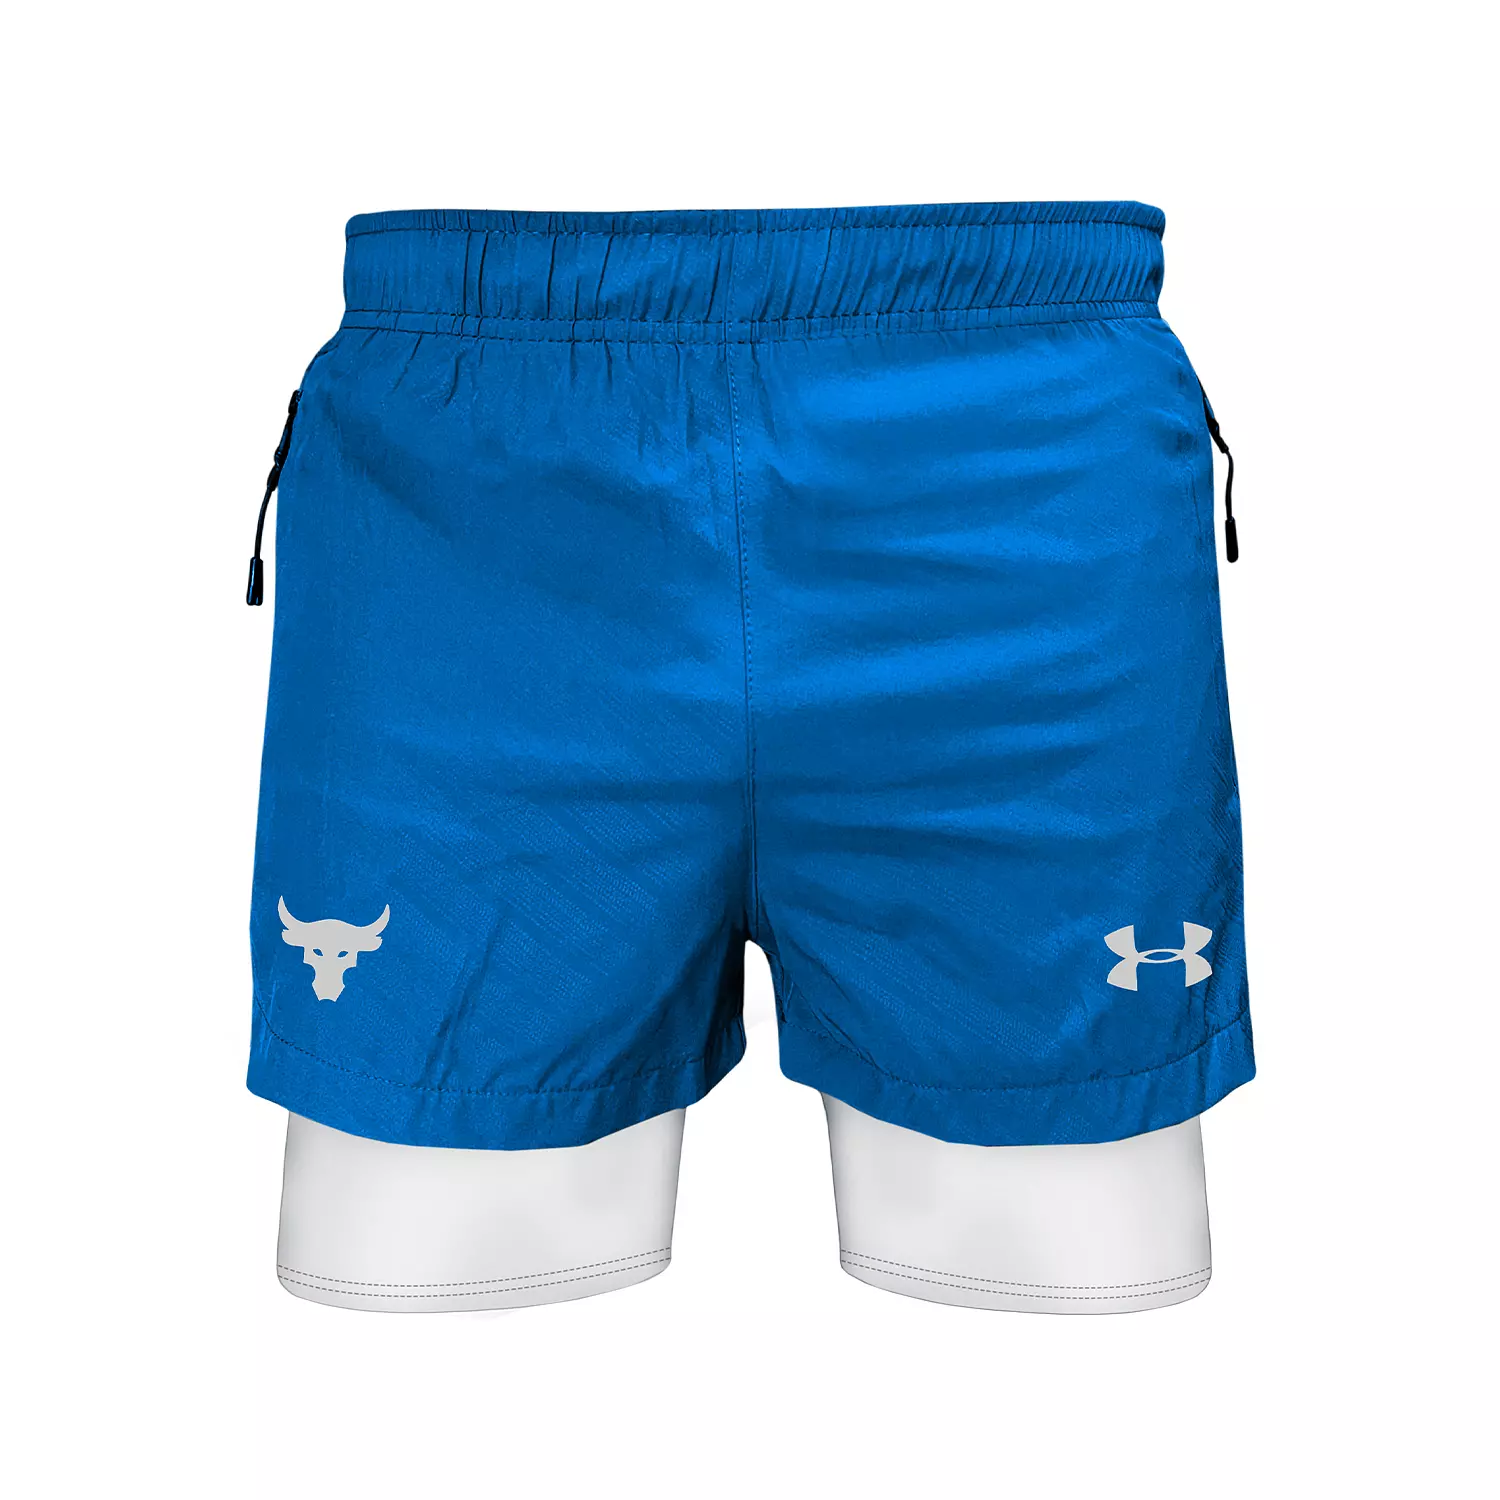 UNDERARMOUR STRETCH WATERPROOF SHORT hover image